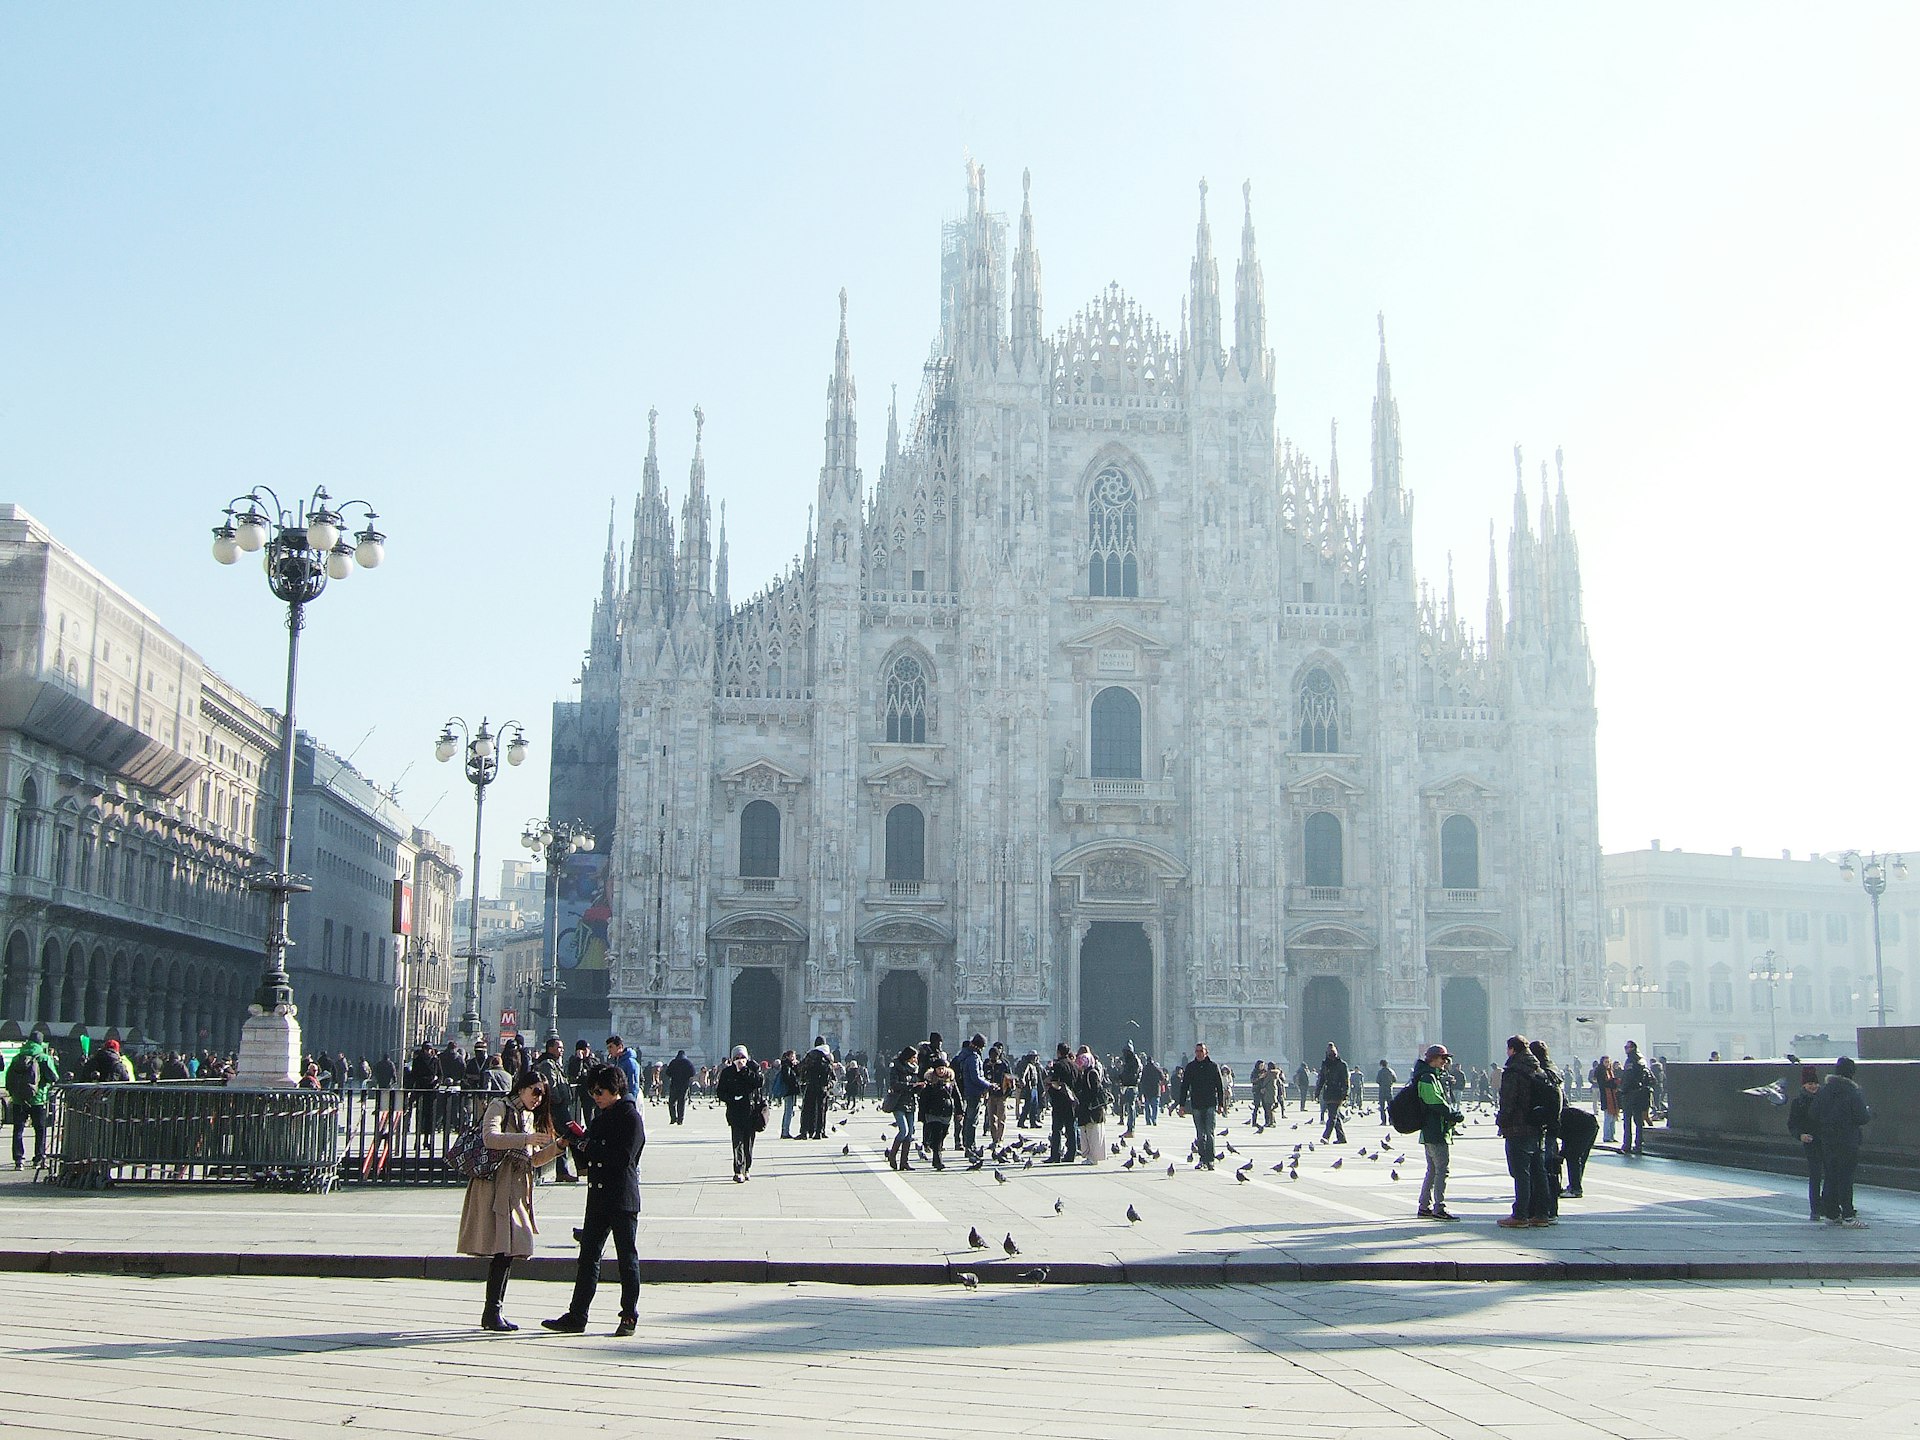 Exterior of the Duomo di Milano and Piazza del Duomo with people walking in front